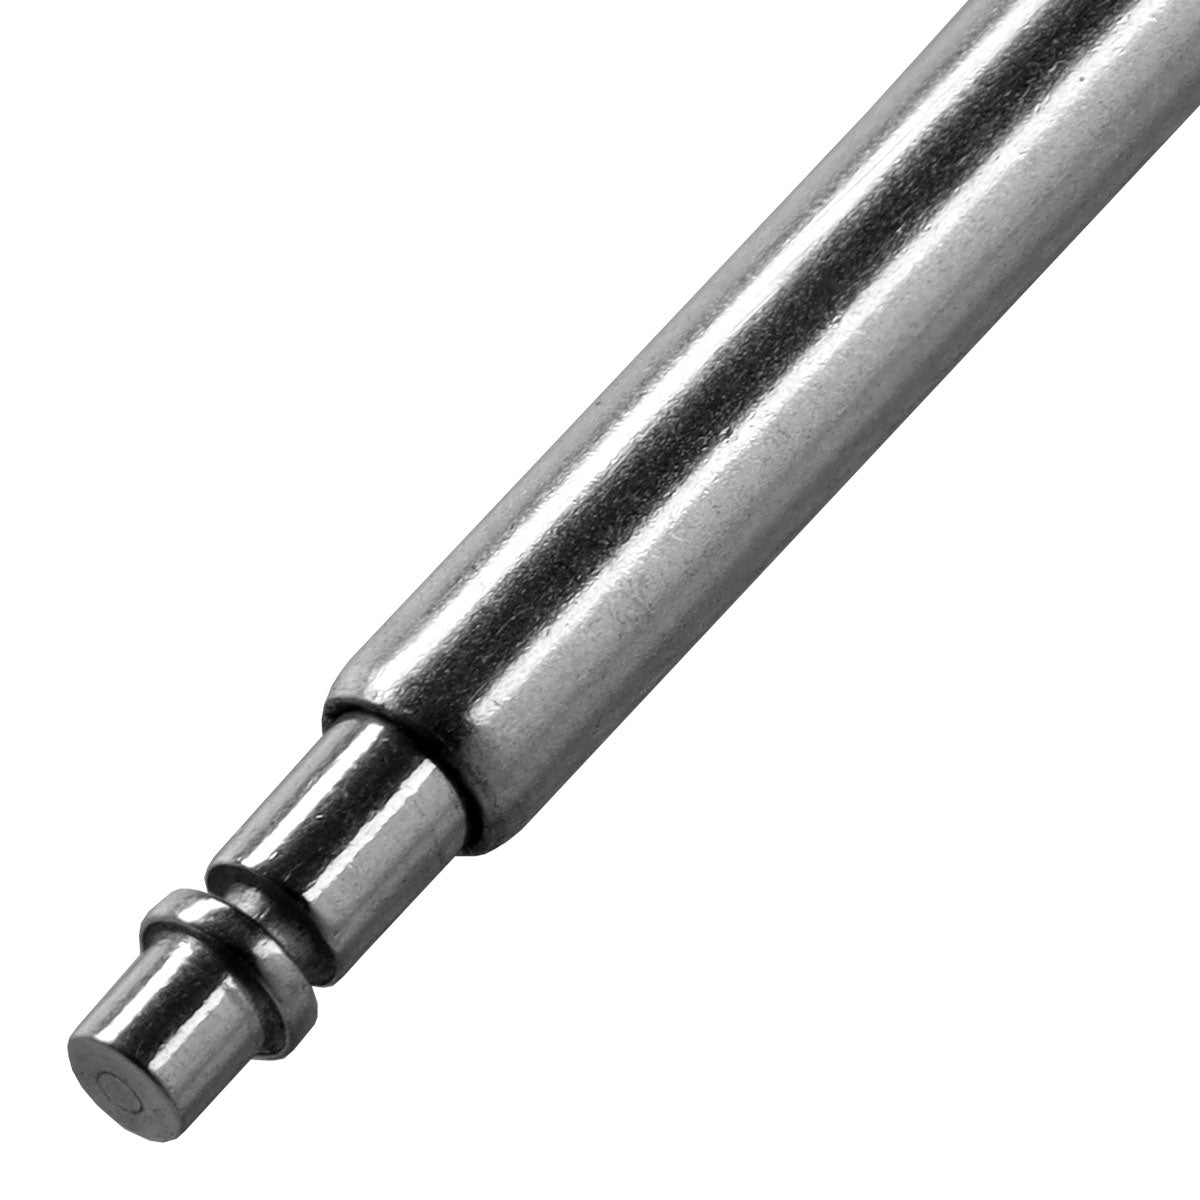 "Skinny Fat" 1.8mm Spring Bars For Diver's Watches